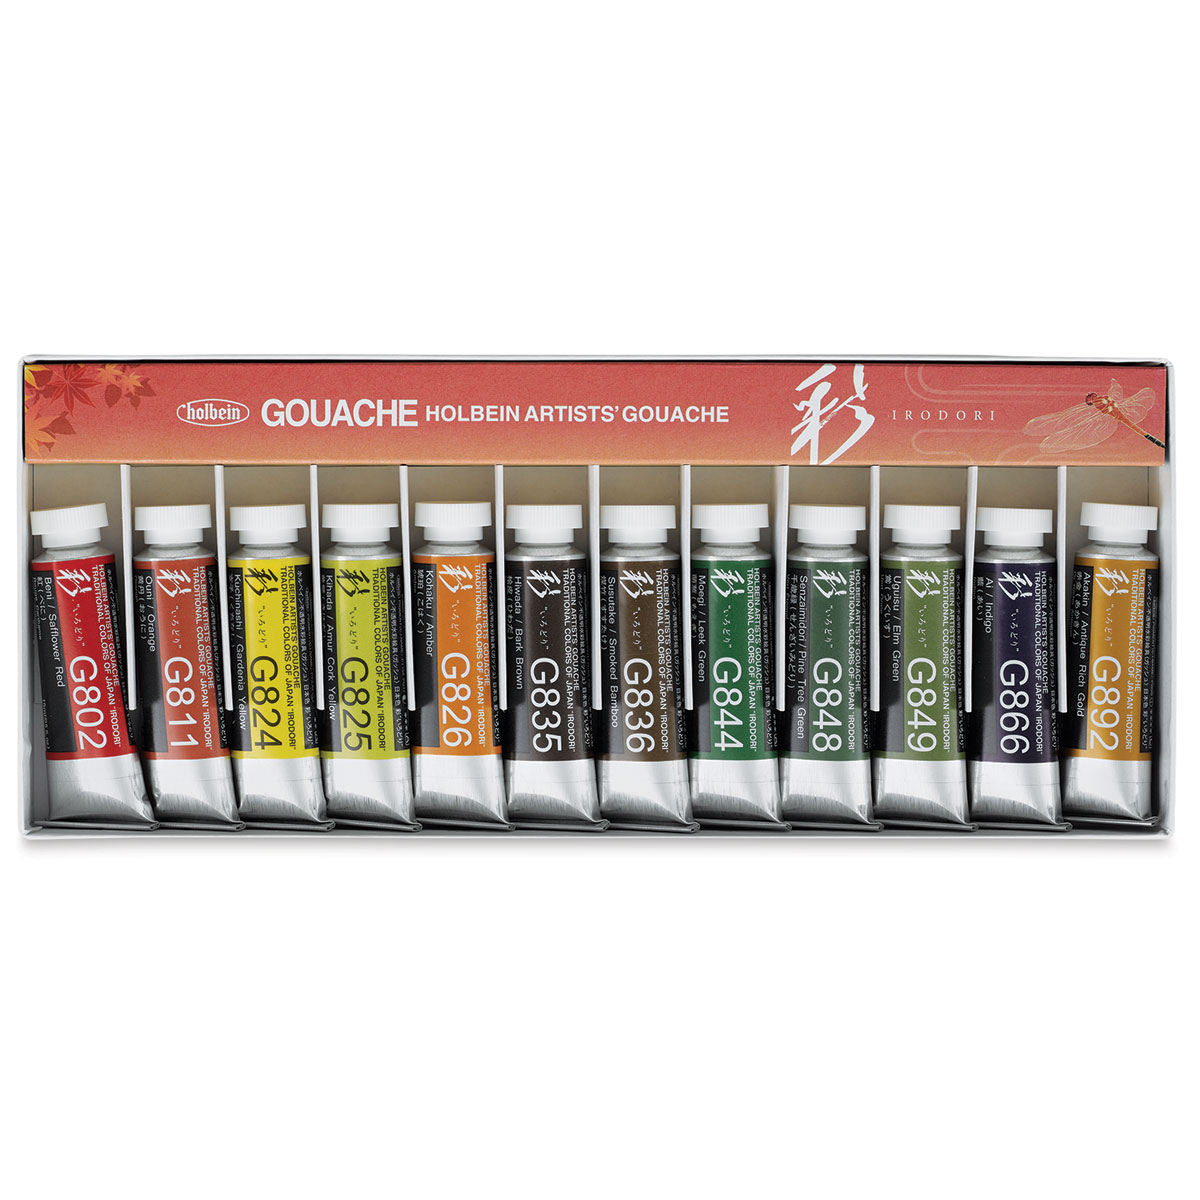 Holbein Artists' Gouache 15ml X 12 Colors Set - Traditional Colors of Japan   Winter  G754